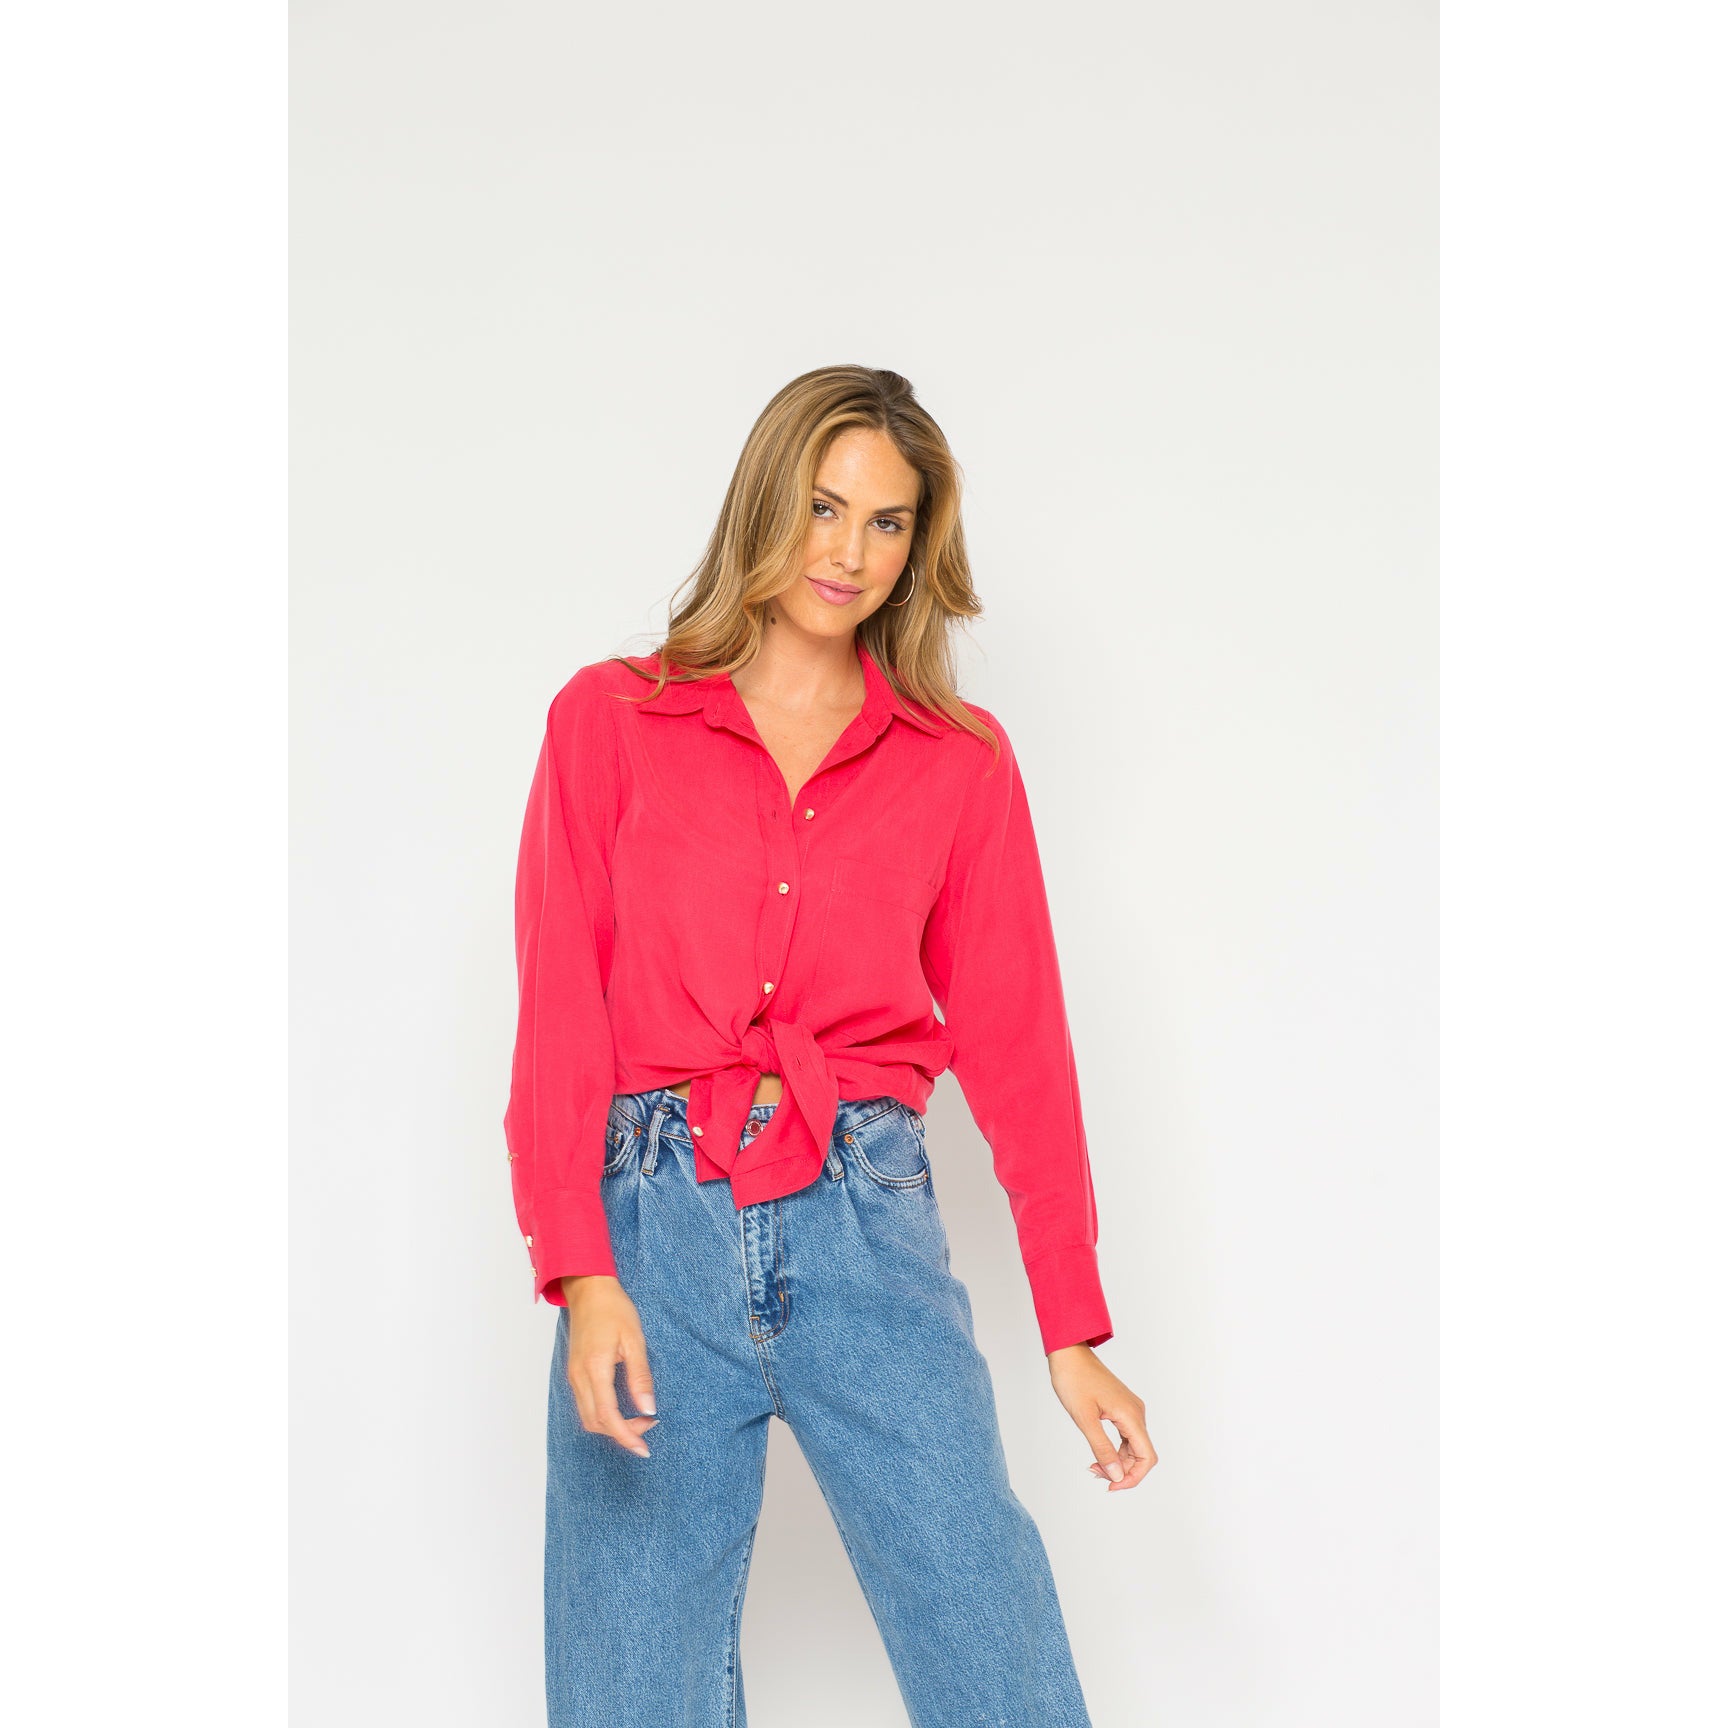 strawberry red women's blouse